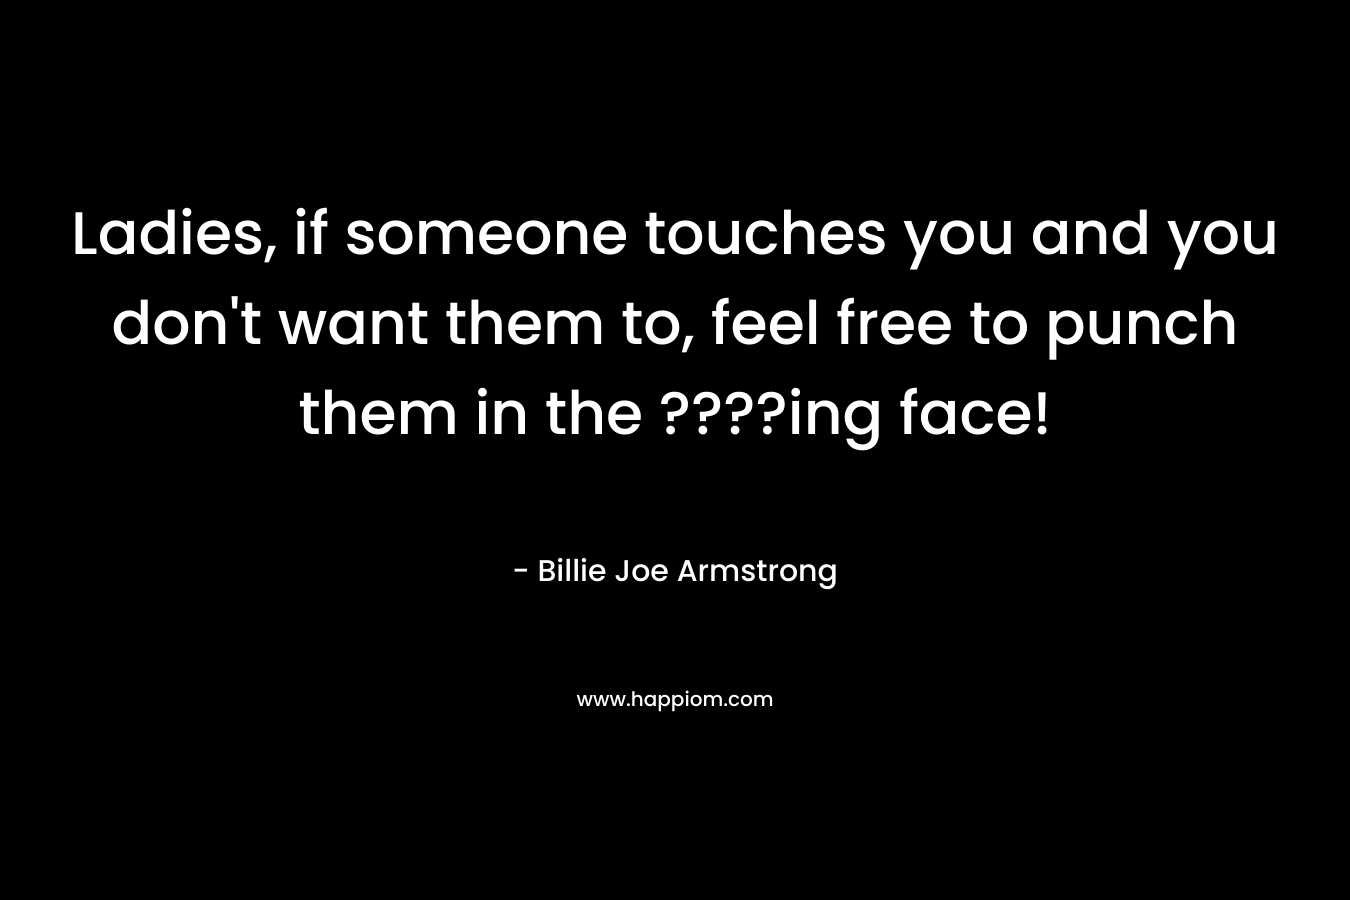 Ladies, if someone touches you and you don’t want them to, feel free to punch them in the ????ing face! – Billie Joe Armstrong